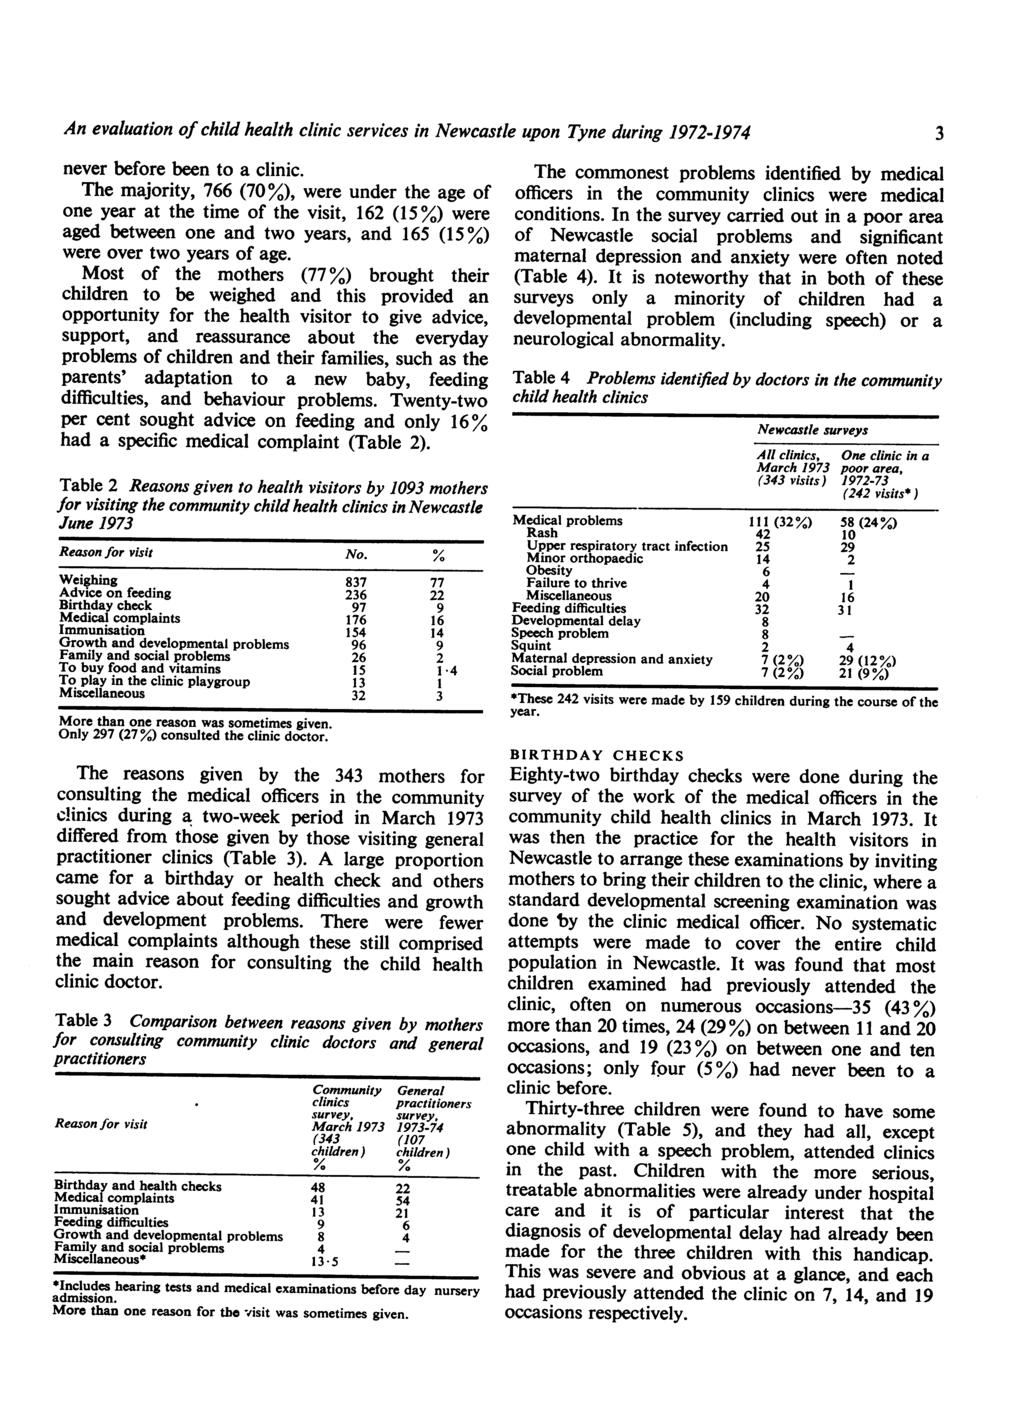 An evaluation of child health clinic services in Newcastle upon Tyne during 1972-1974 never before been to a clinic.